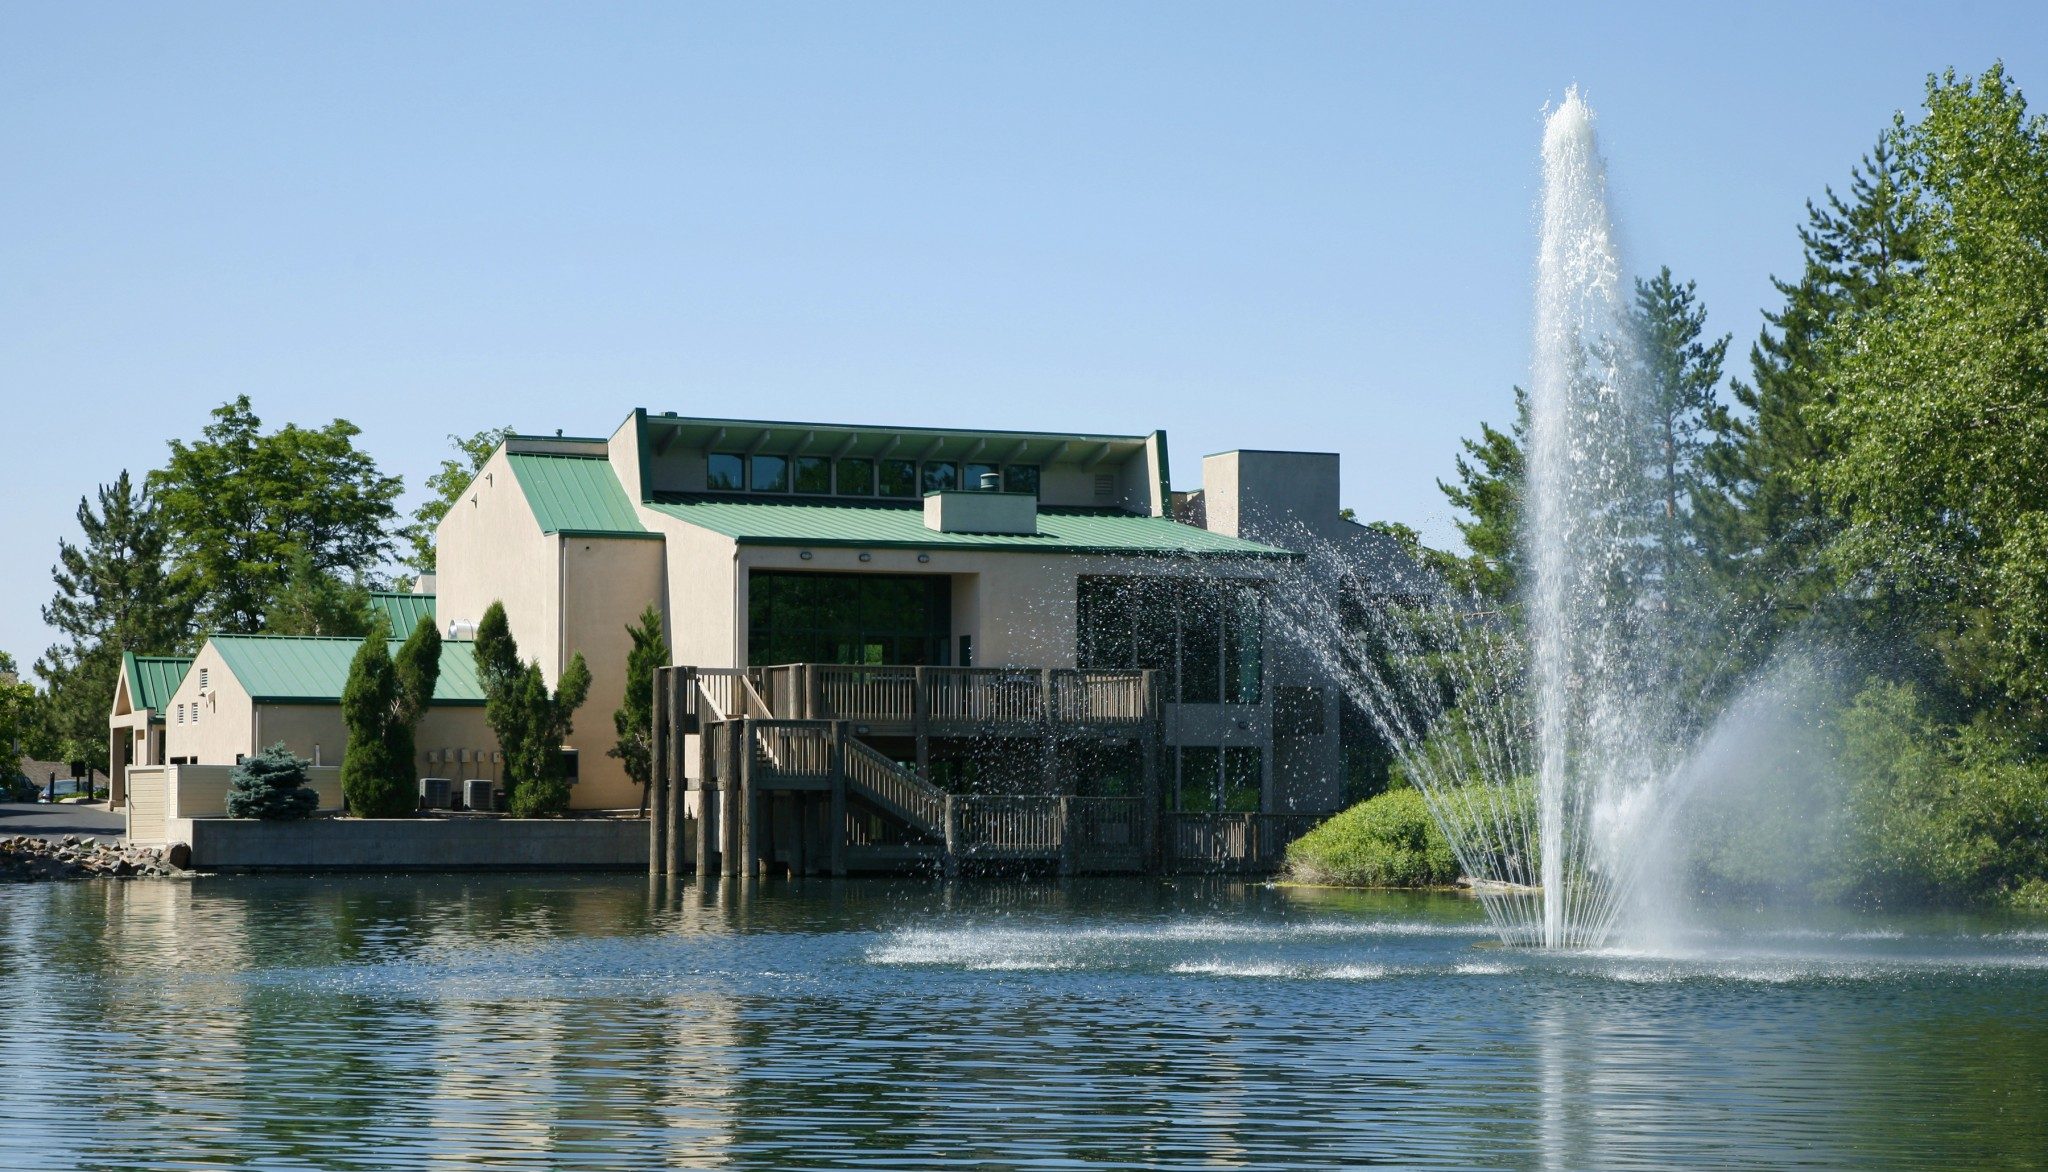 View of lake and fountain with building and trees in the background.